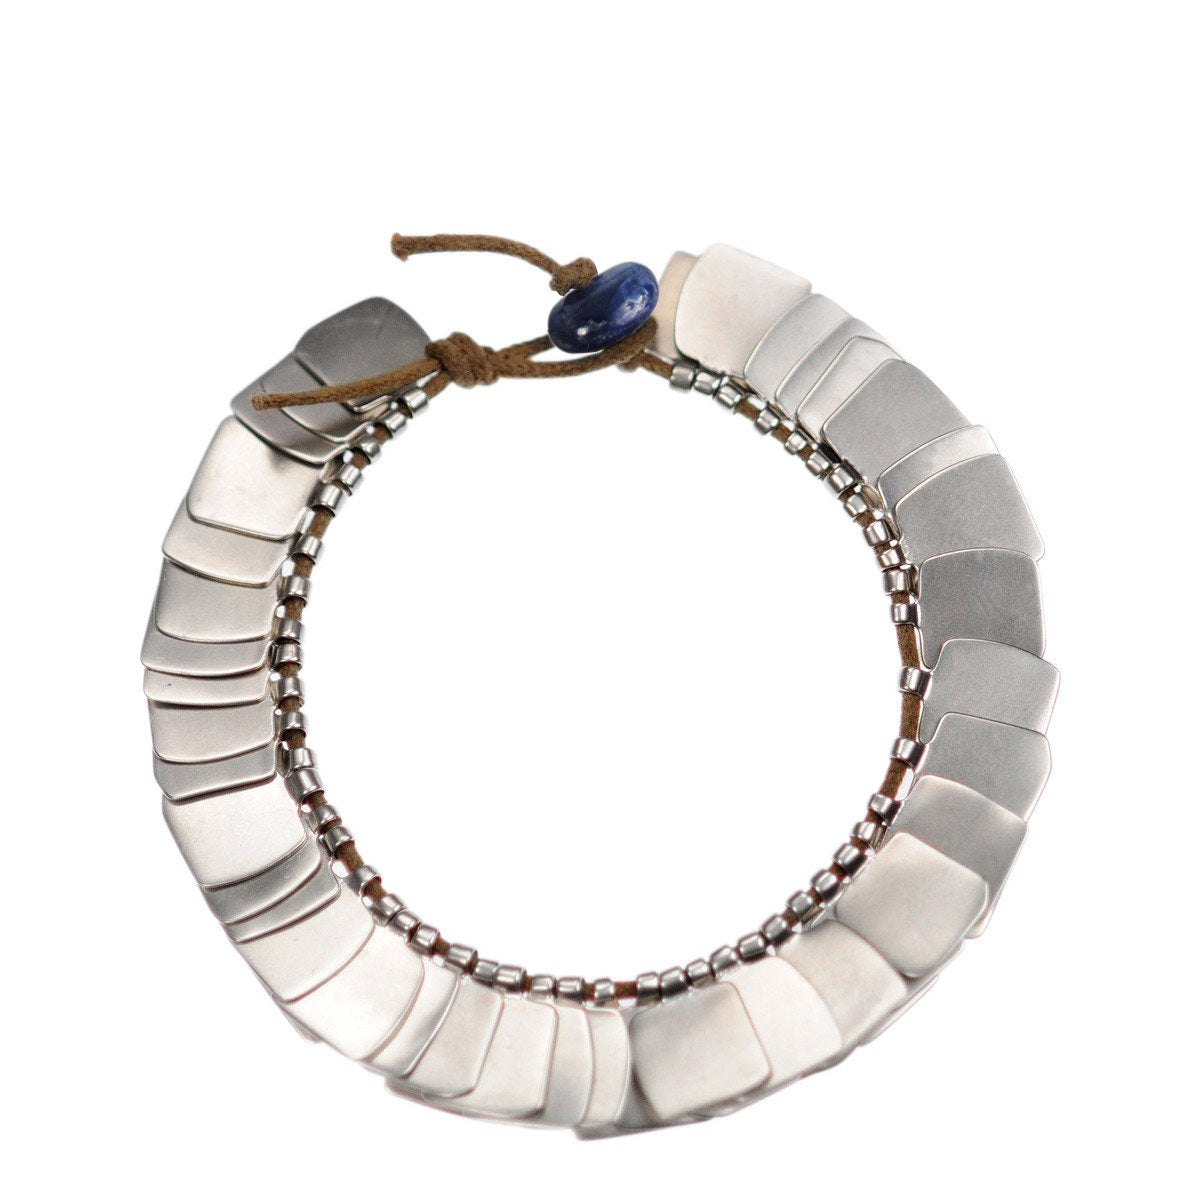 Sterling Silver Full Flattened Metal Bracelet on Cord with Sapphire Bead Closure